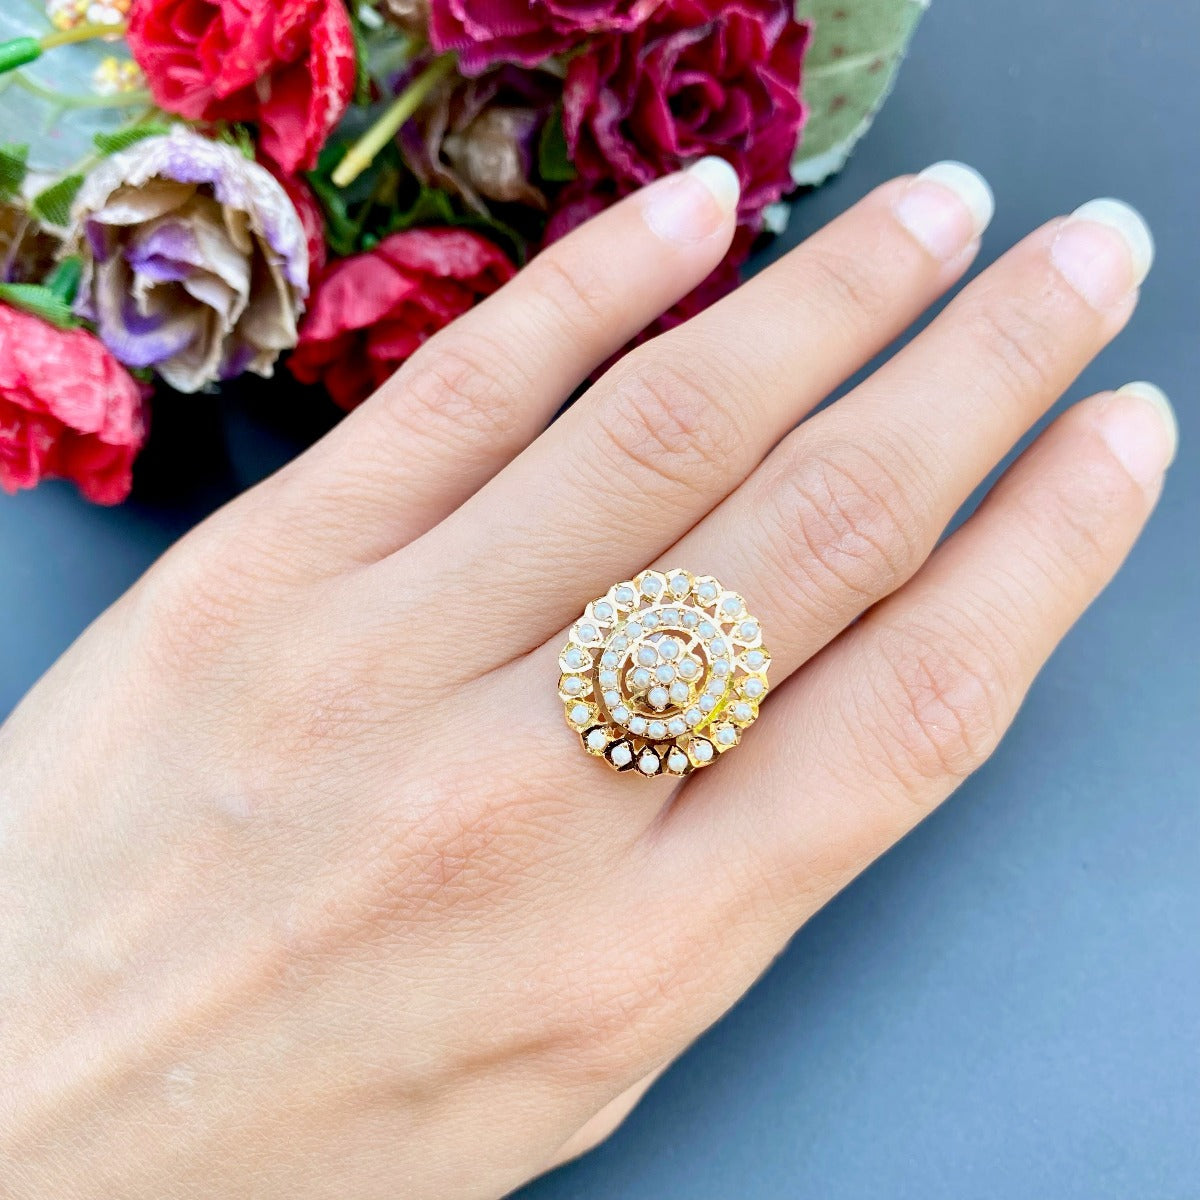 Oval Pearl Ring in 22k Gold GLR 041